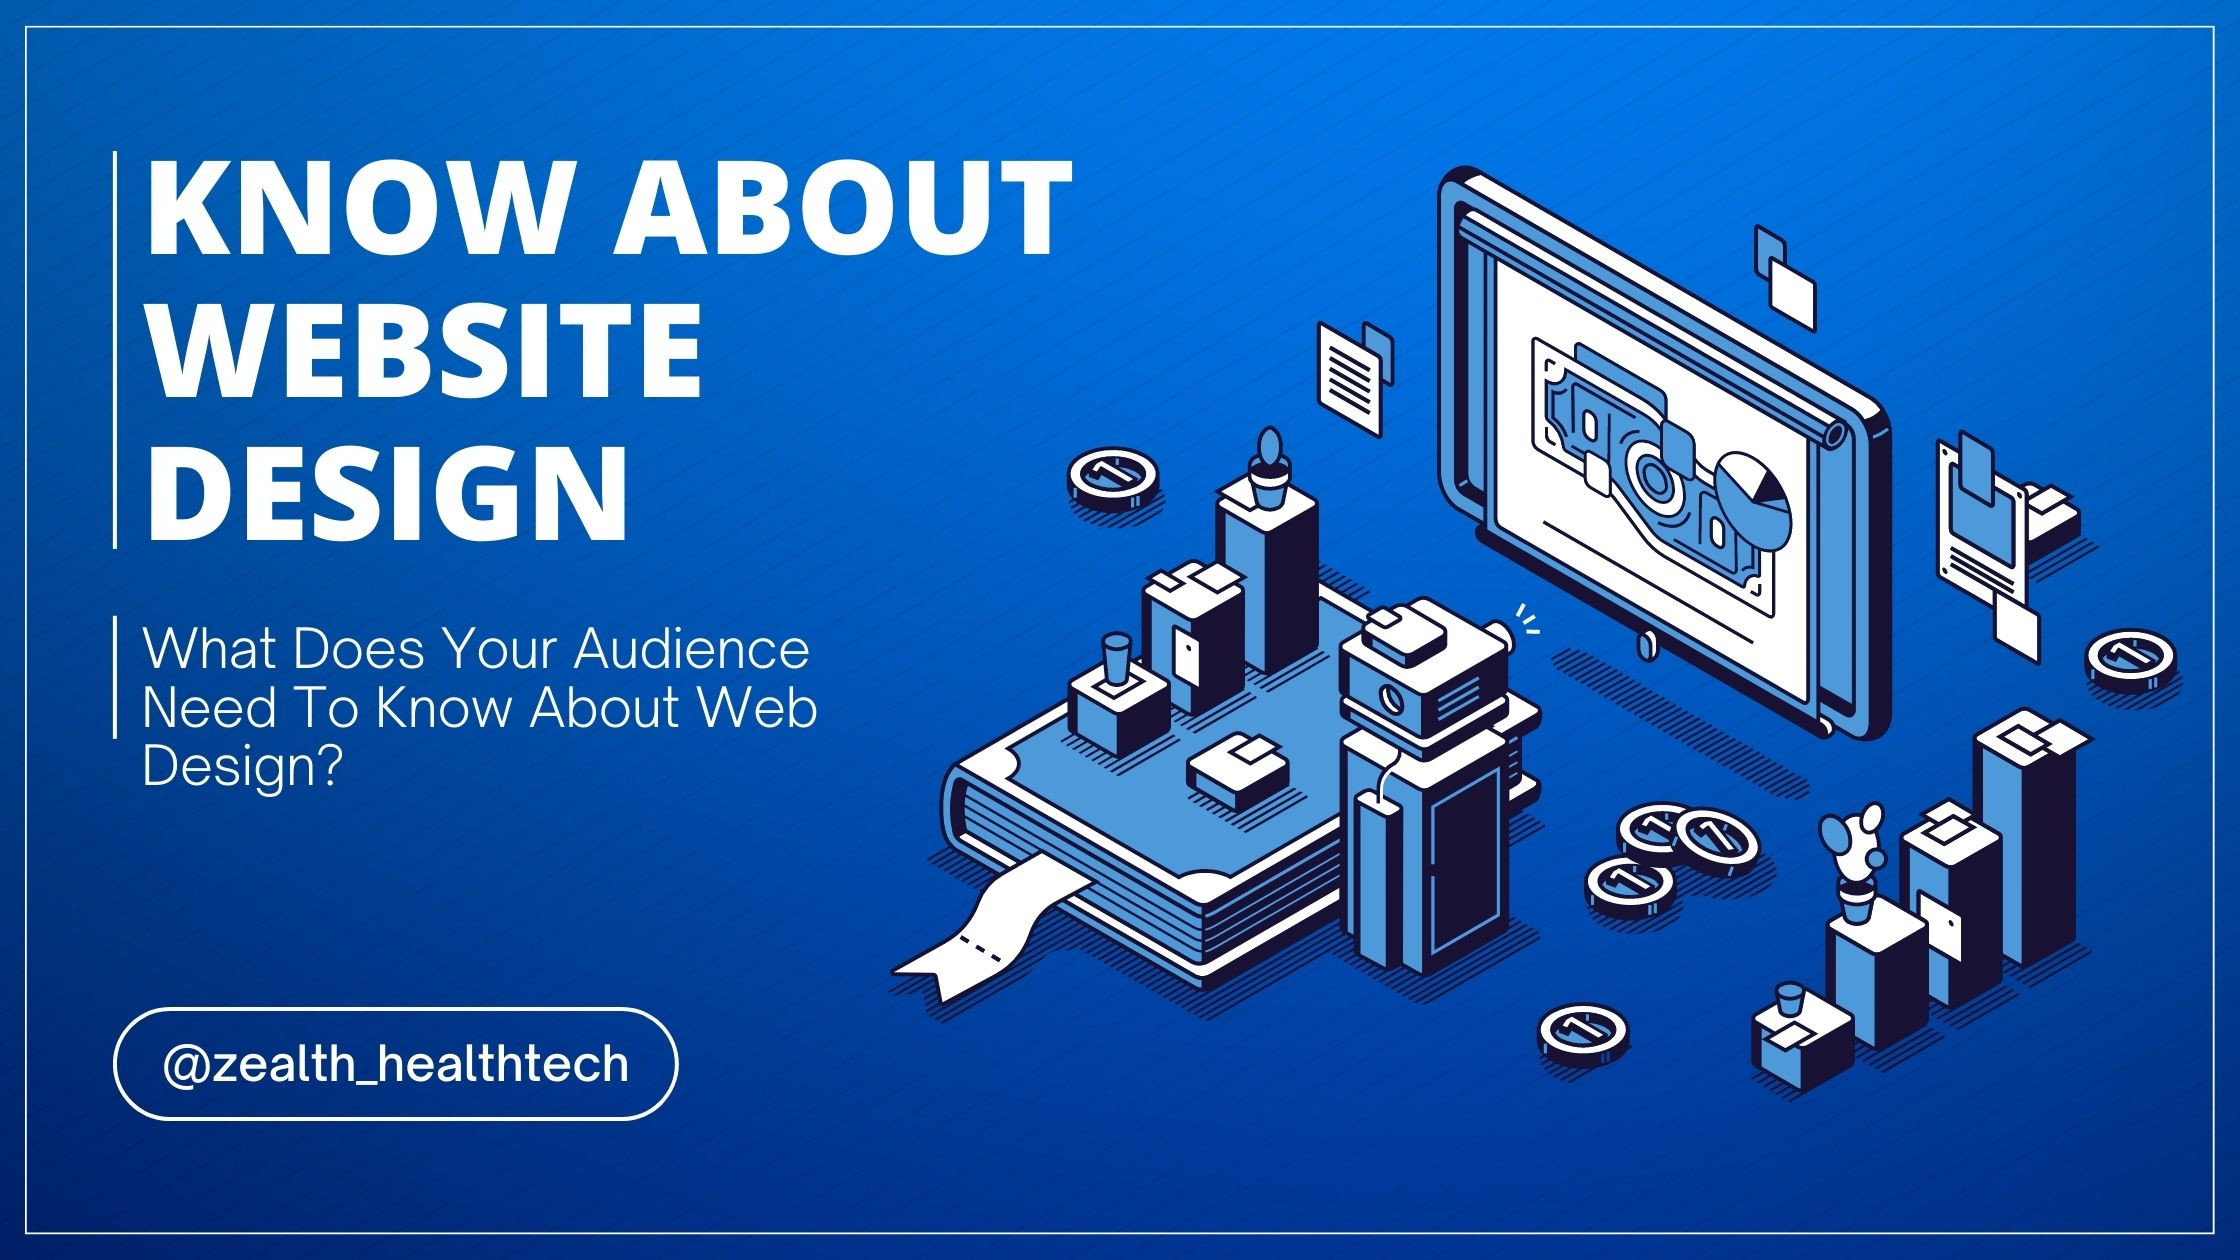 WHAT DOES YOUR AUDIENCE NEED TO KNOW ABOUT WEB DESIGN?